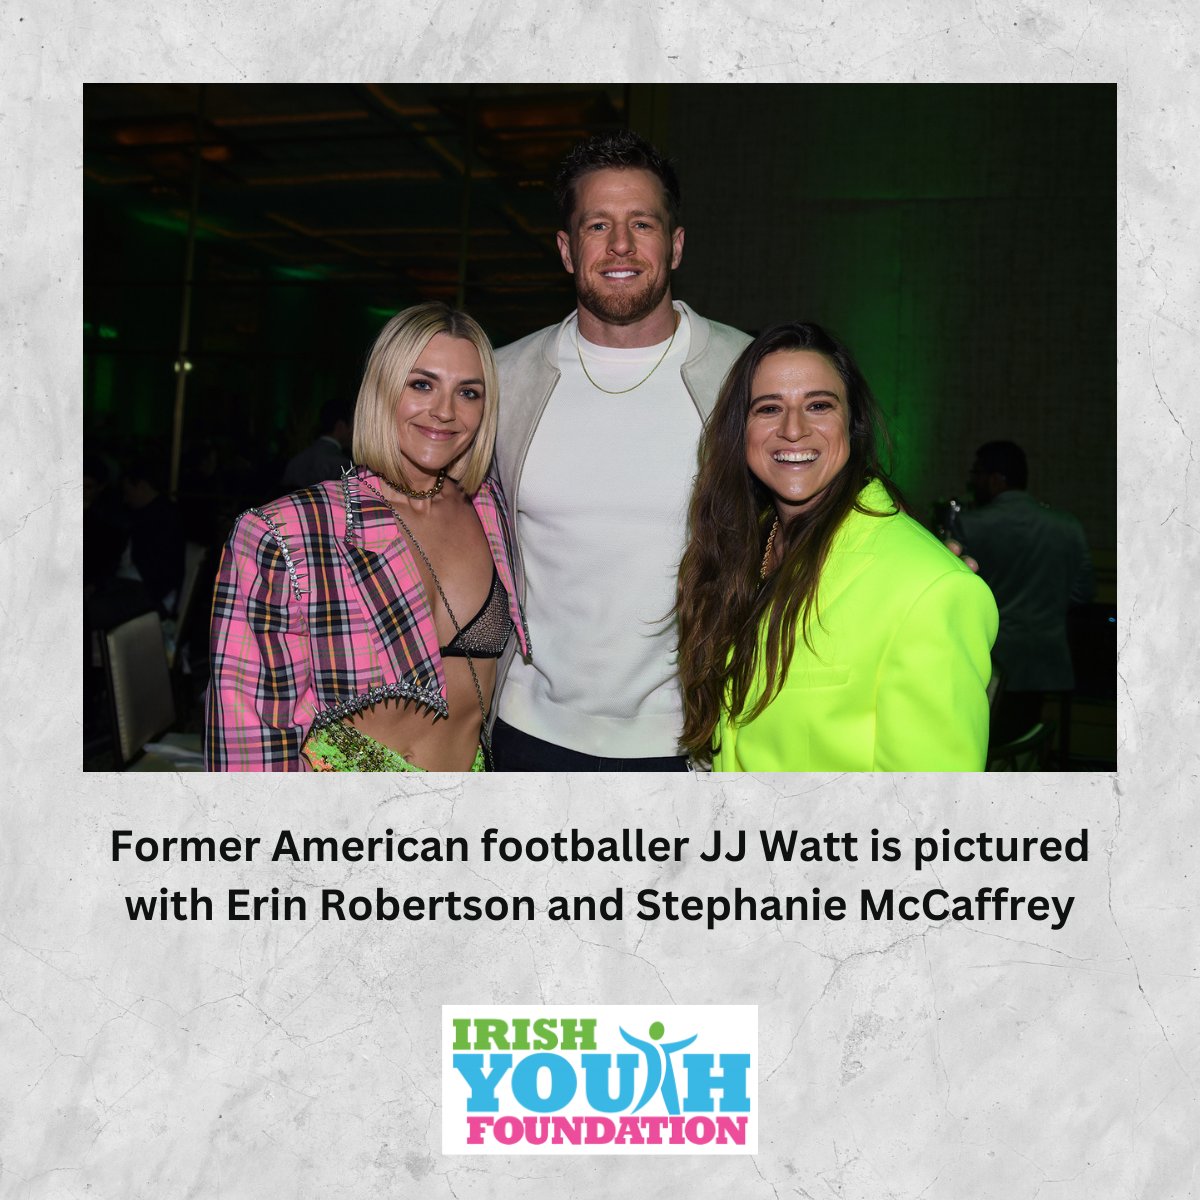 We were thrilled to have the amazing Former American footballer @JJWatt, Erin Robertson of Pickle Pop, winner of Project Runway season 15 & founder of Pickle Pop & former pro footballer @smccaffrey9 attend the Rock and Rugby event all the way from the US. rocknrugby.com/lite-ui/